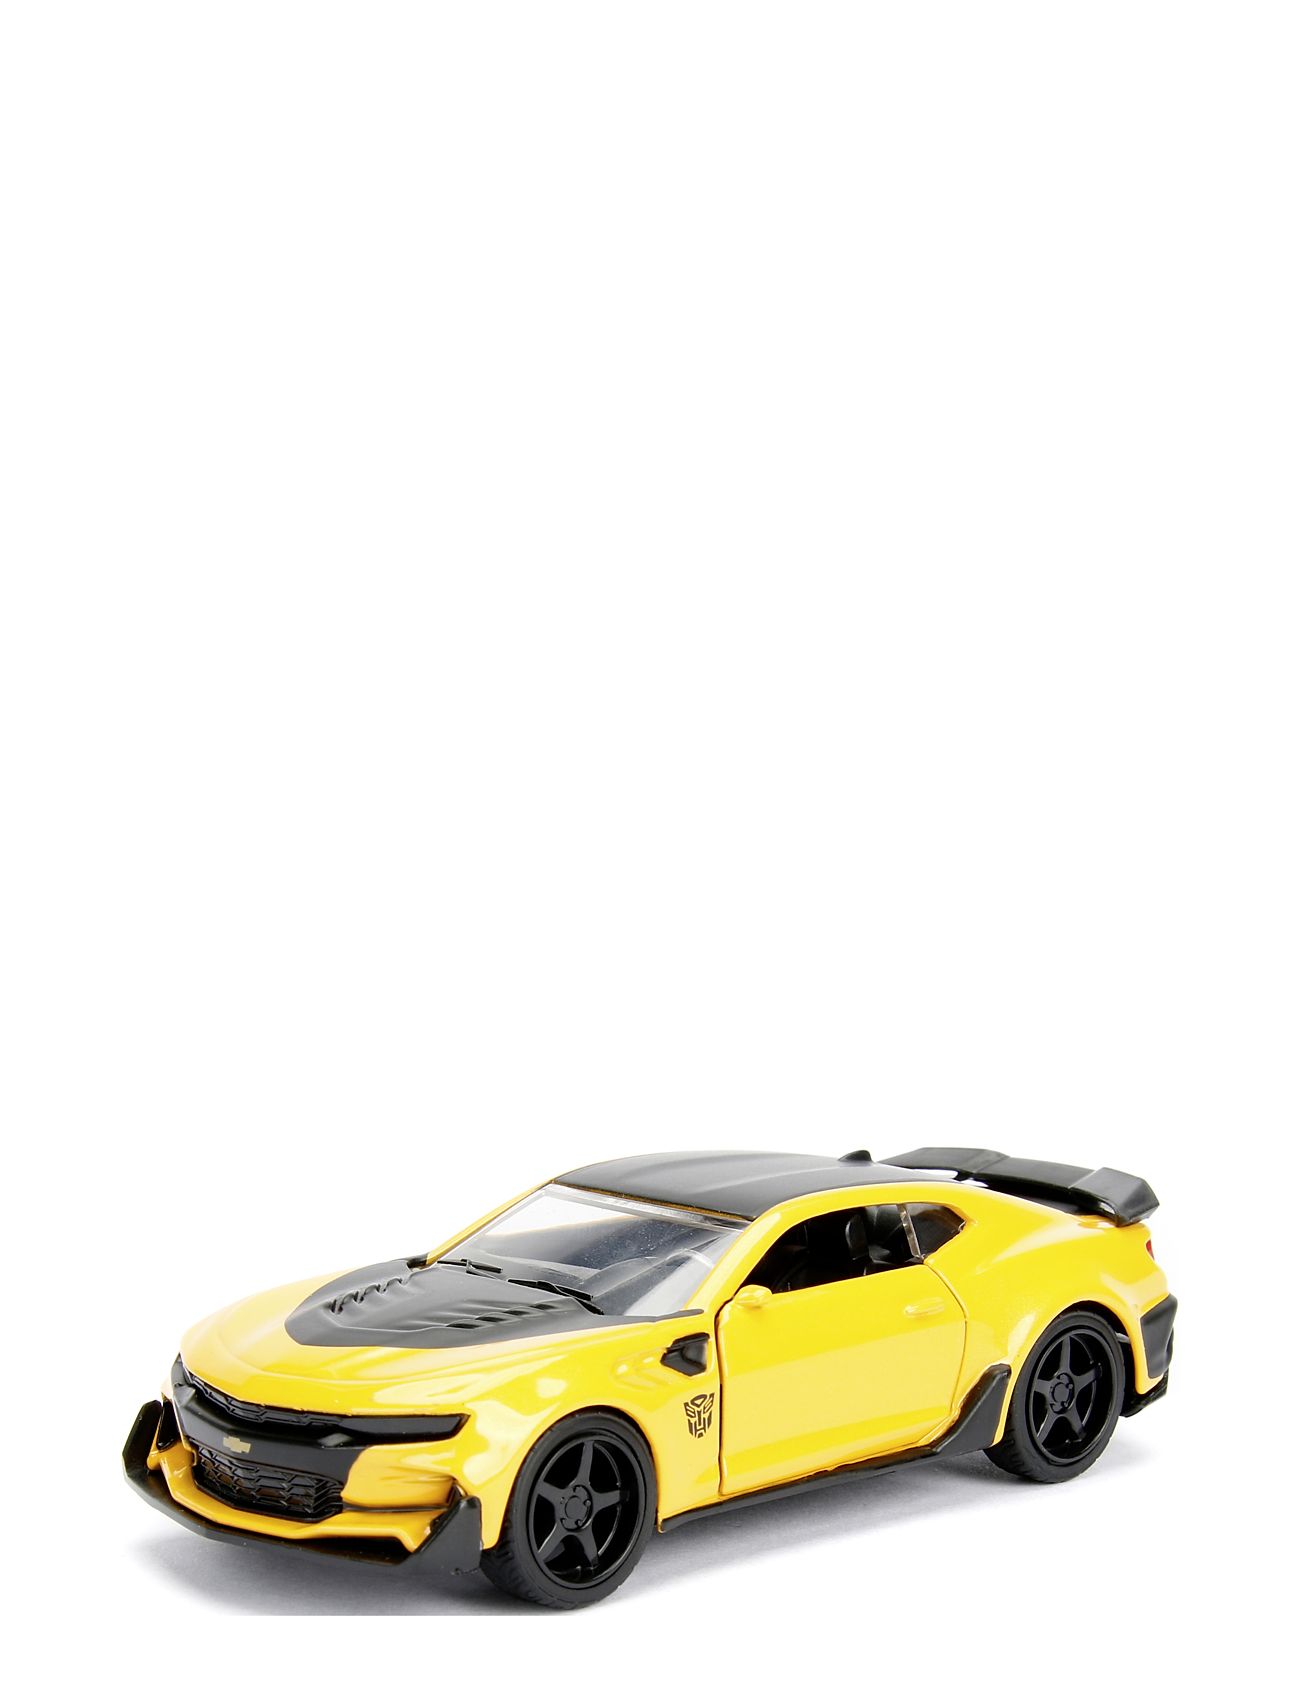 Transformers Bumblebee 1:32 Toys Toy Cars & Vehicles Toy Cars Yellow Jada Toys